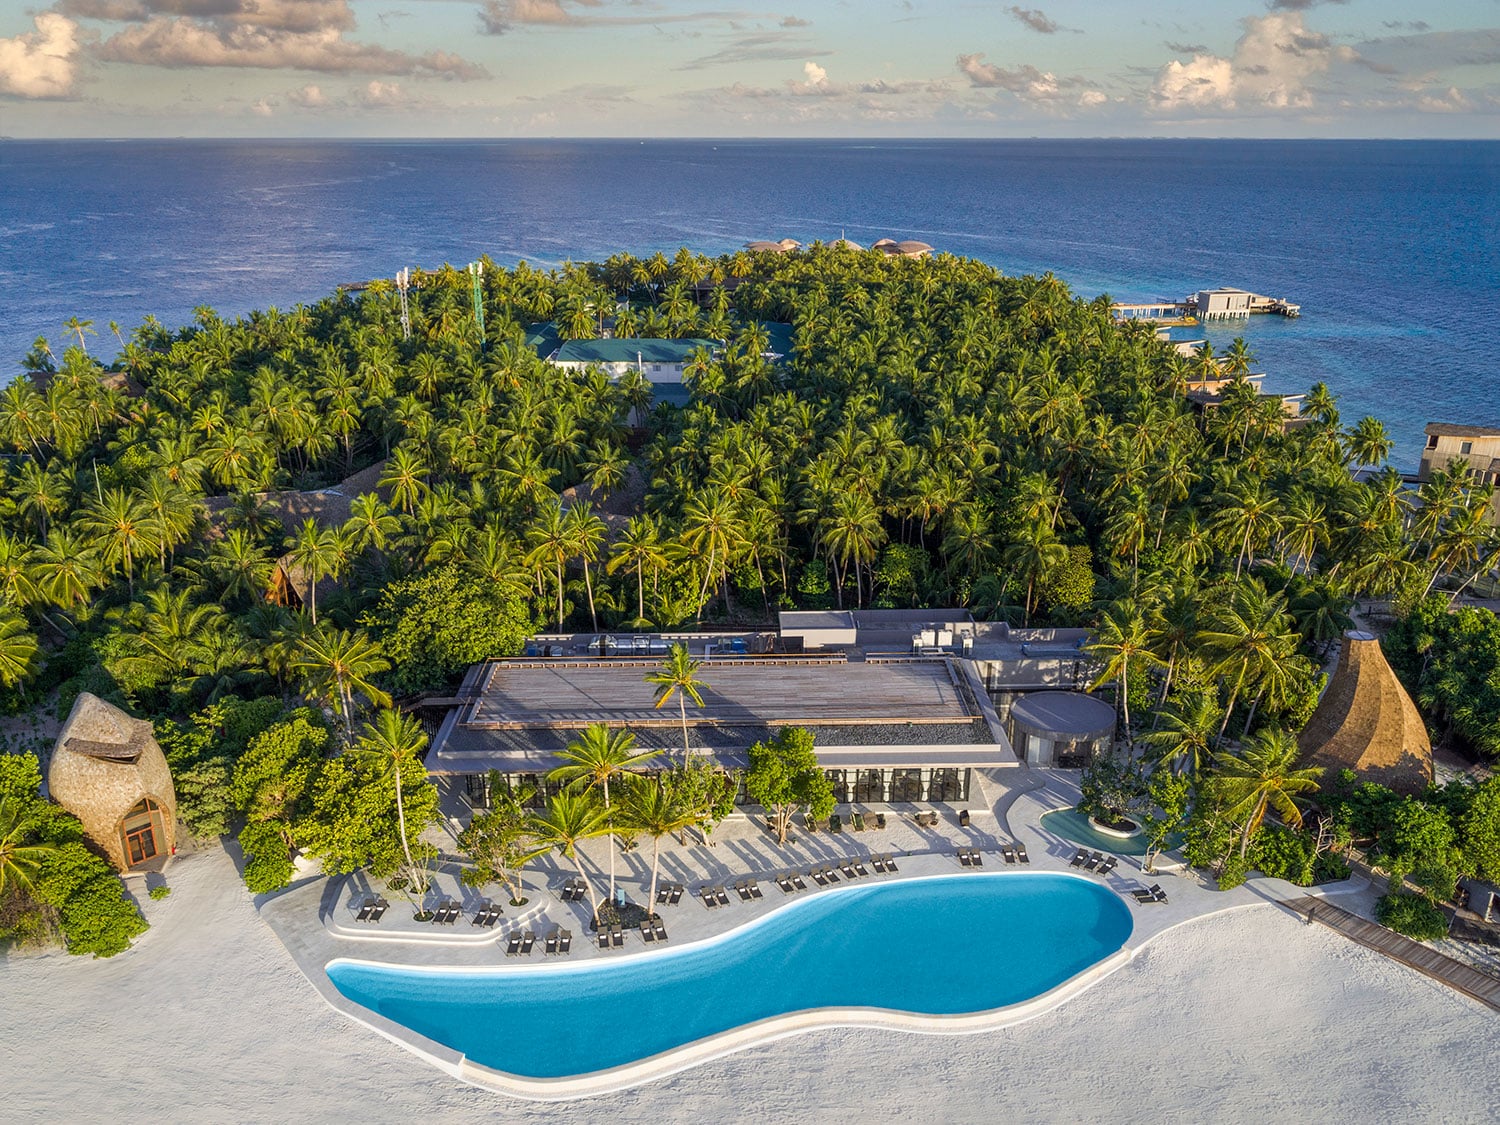 An aerial view of the pool and Alba restaurant at The St. Regis Maldives Vommuli Resort.